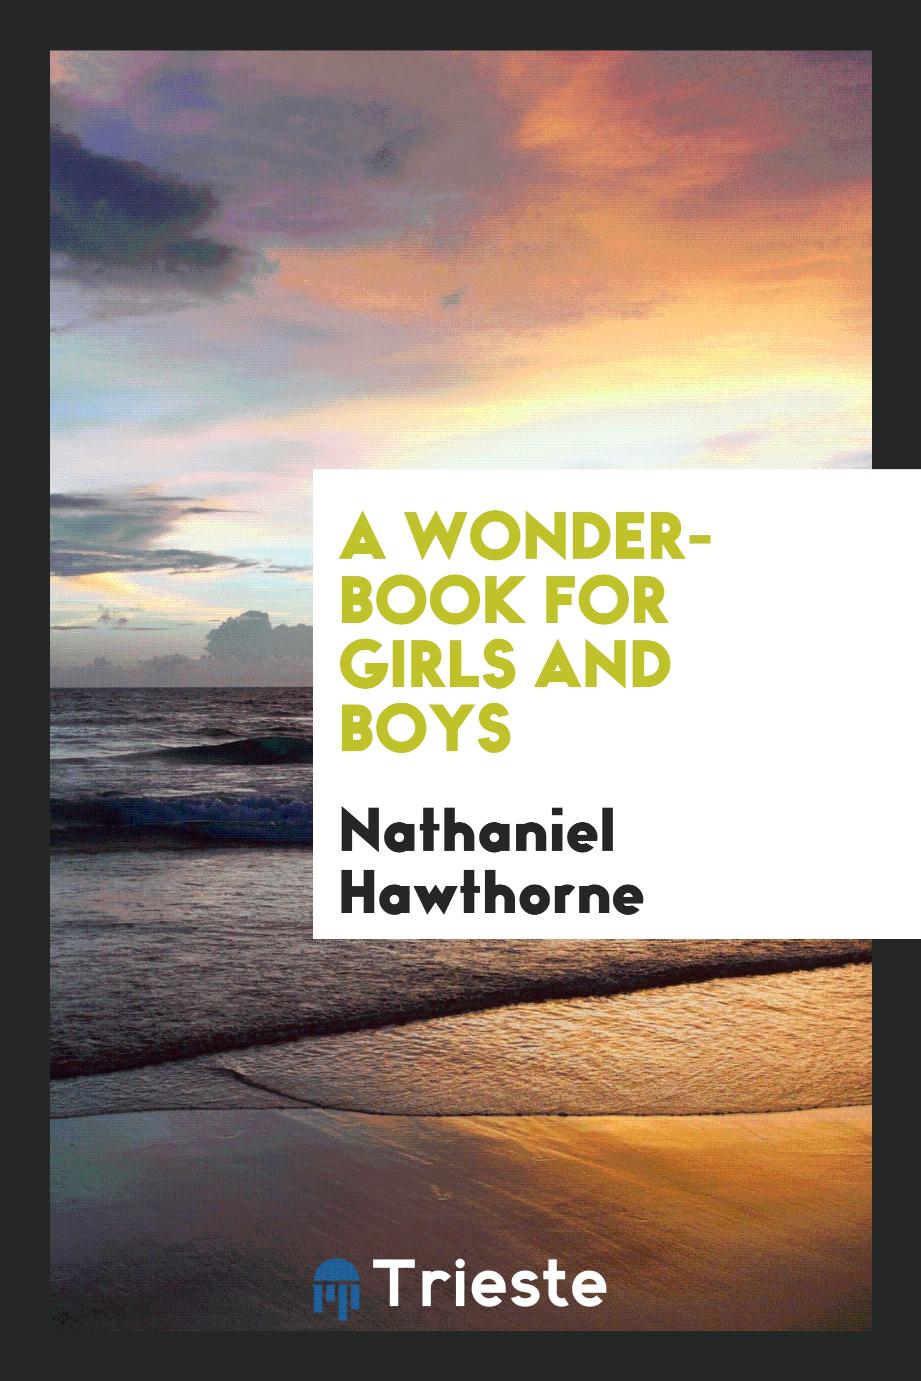 A wonder-book for girls and boys